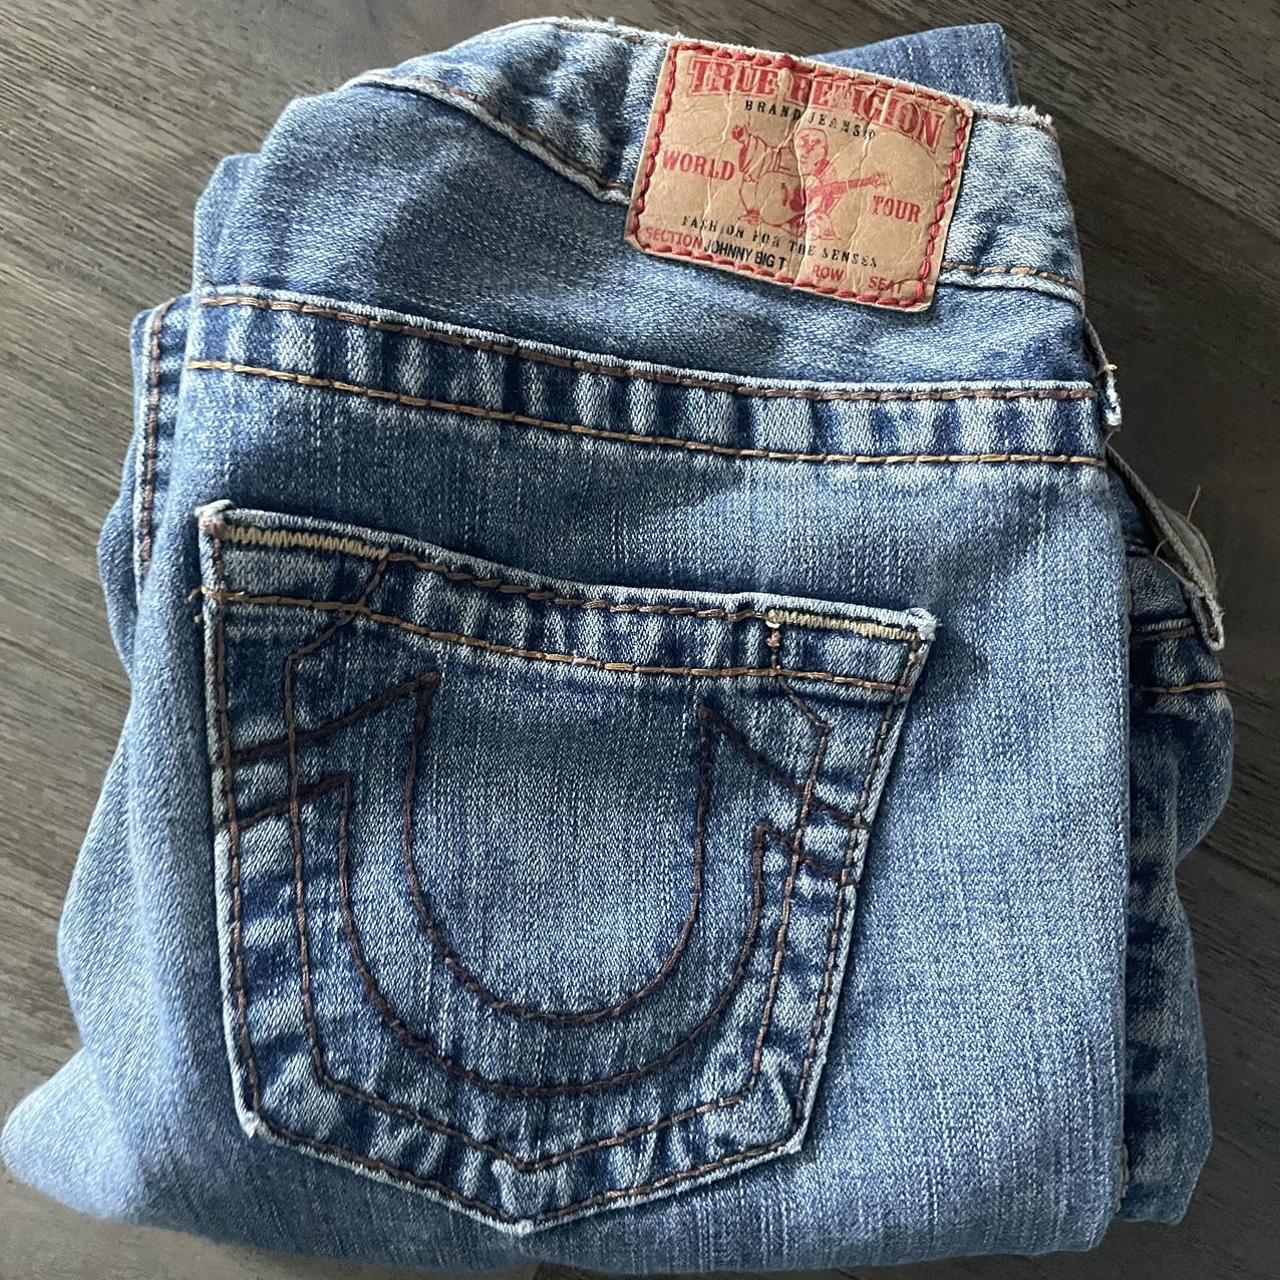 TRUE RELIGION JEANS JOHNNY BIG T 28” COULD BE WORN... - Depop